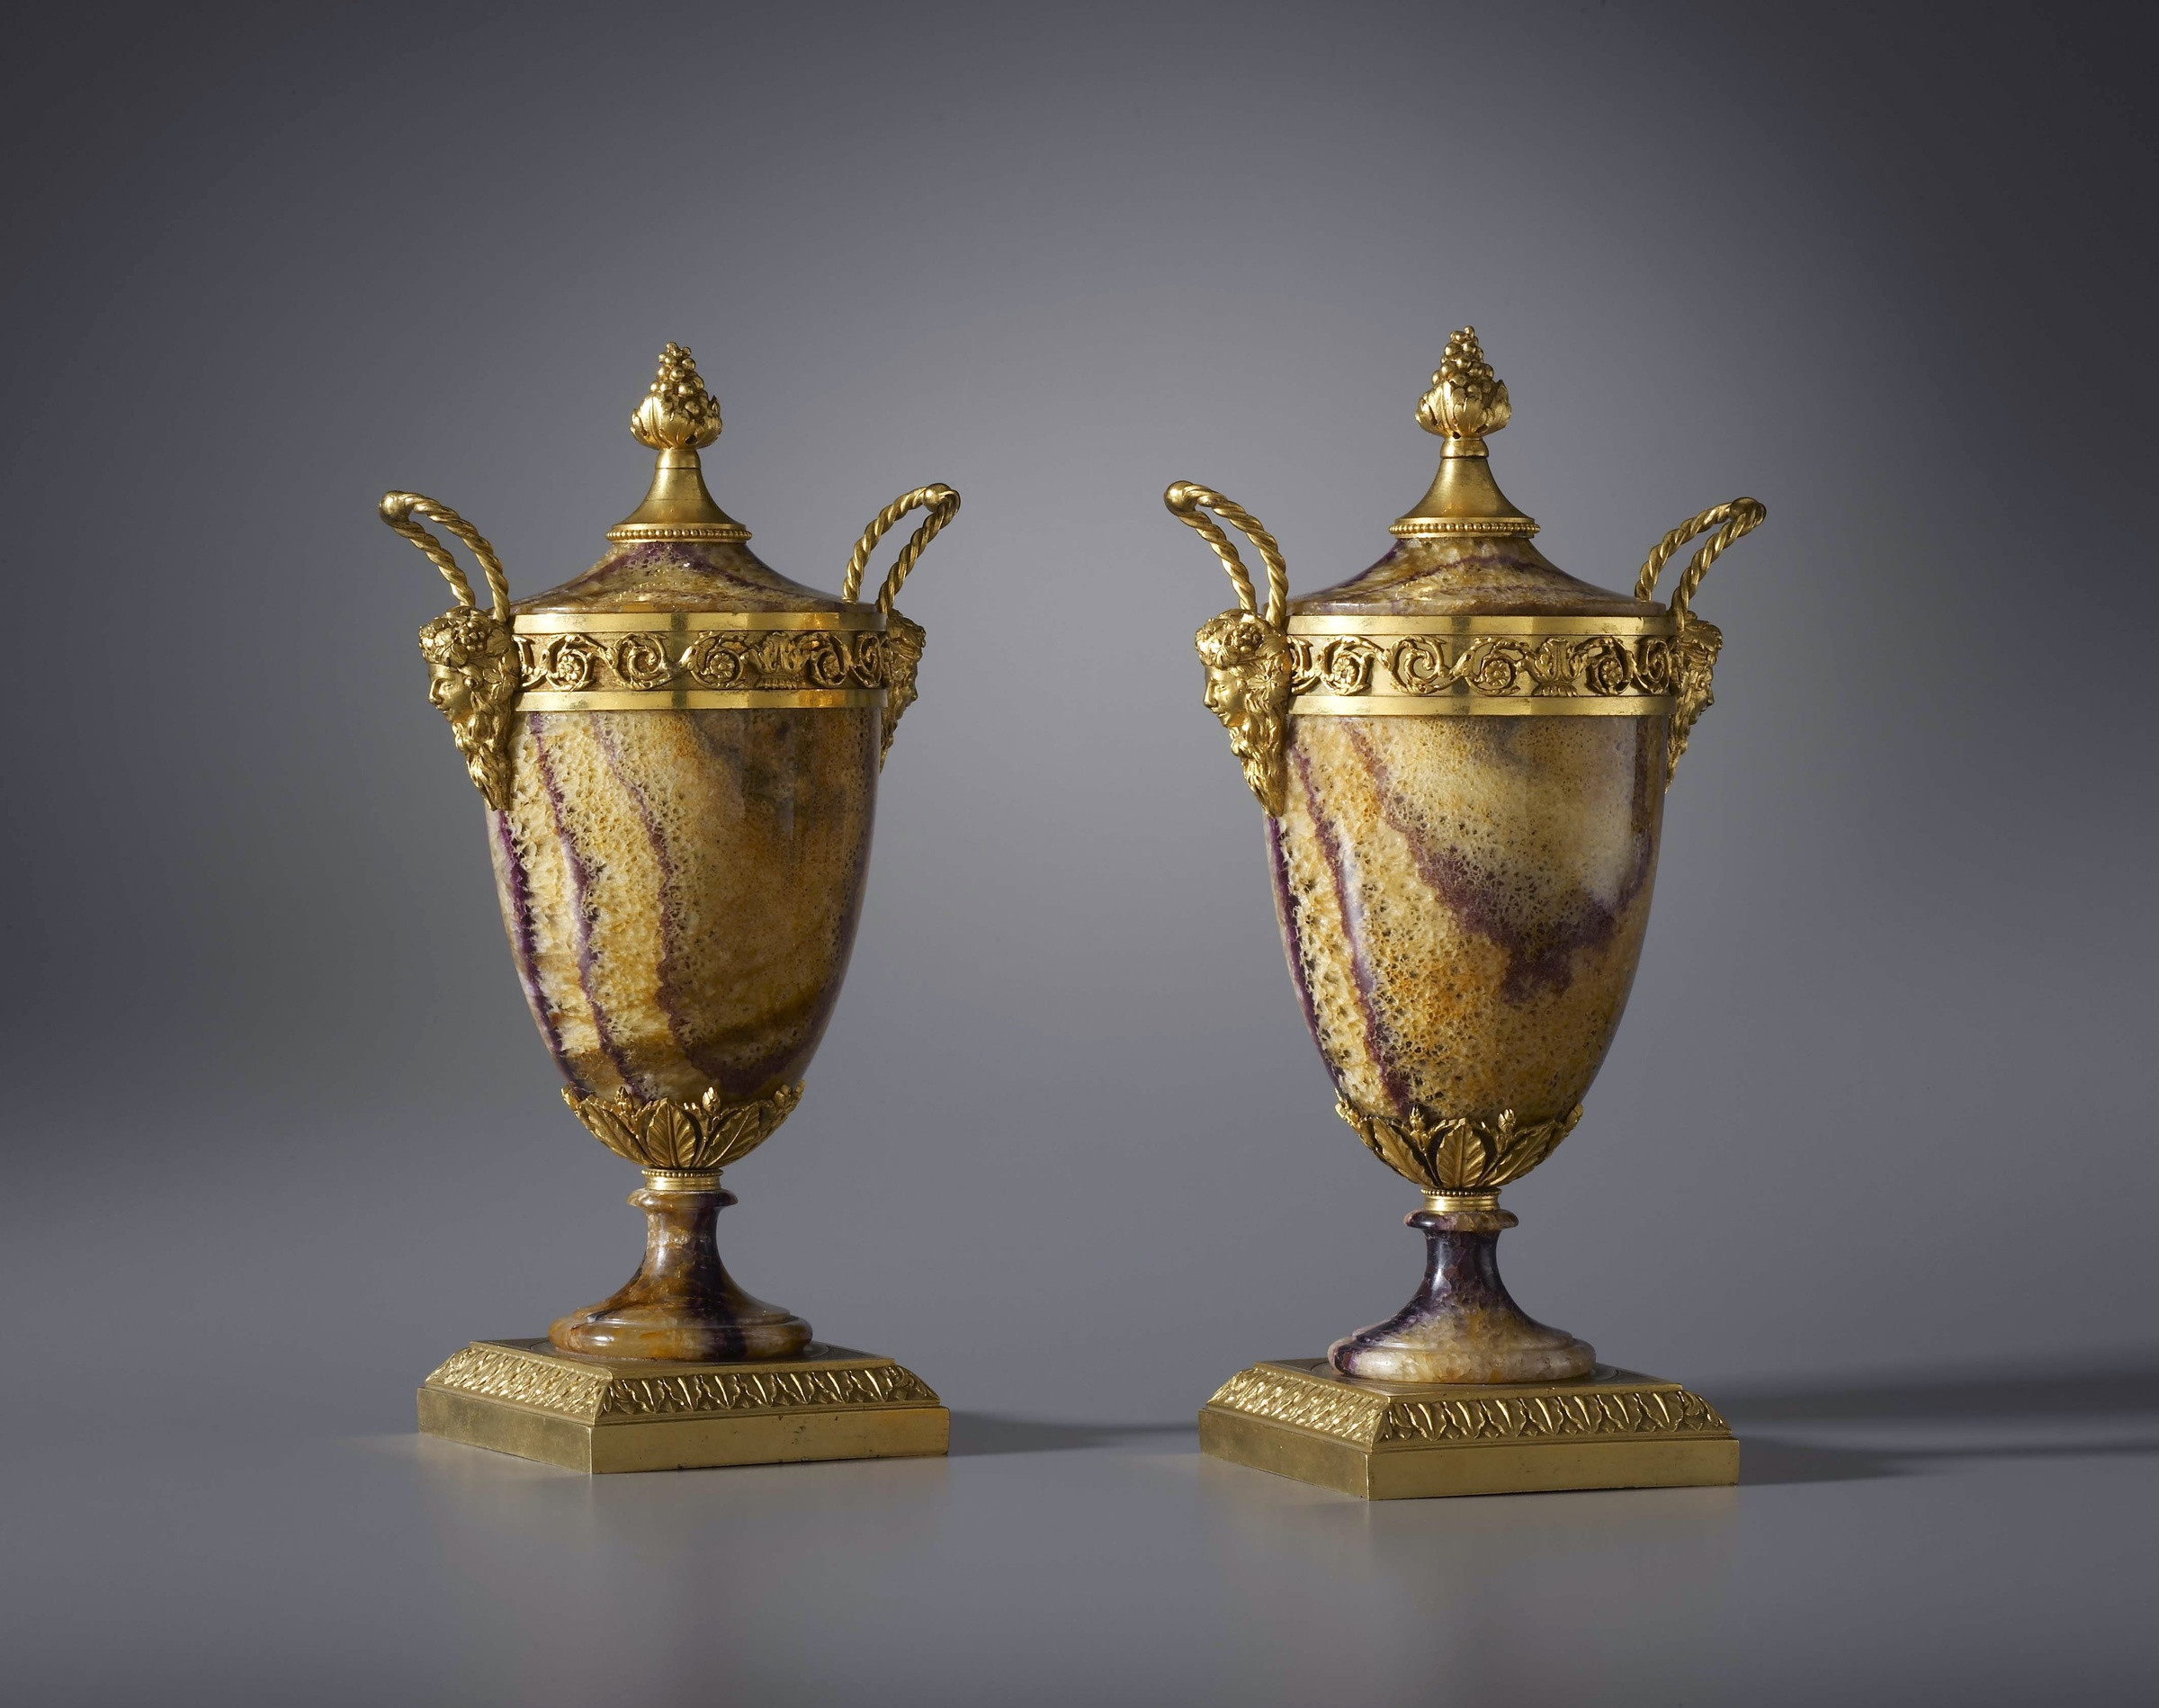 16 Spectacular Large Brass Vase 2024 free download large brass vase of matthew boulton attributed to a pair of georgian covered vases within a pair of georgian covered vases attributed to matthew boulton